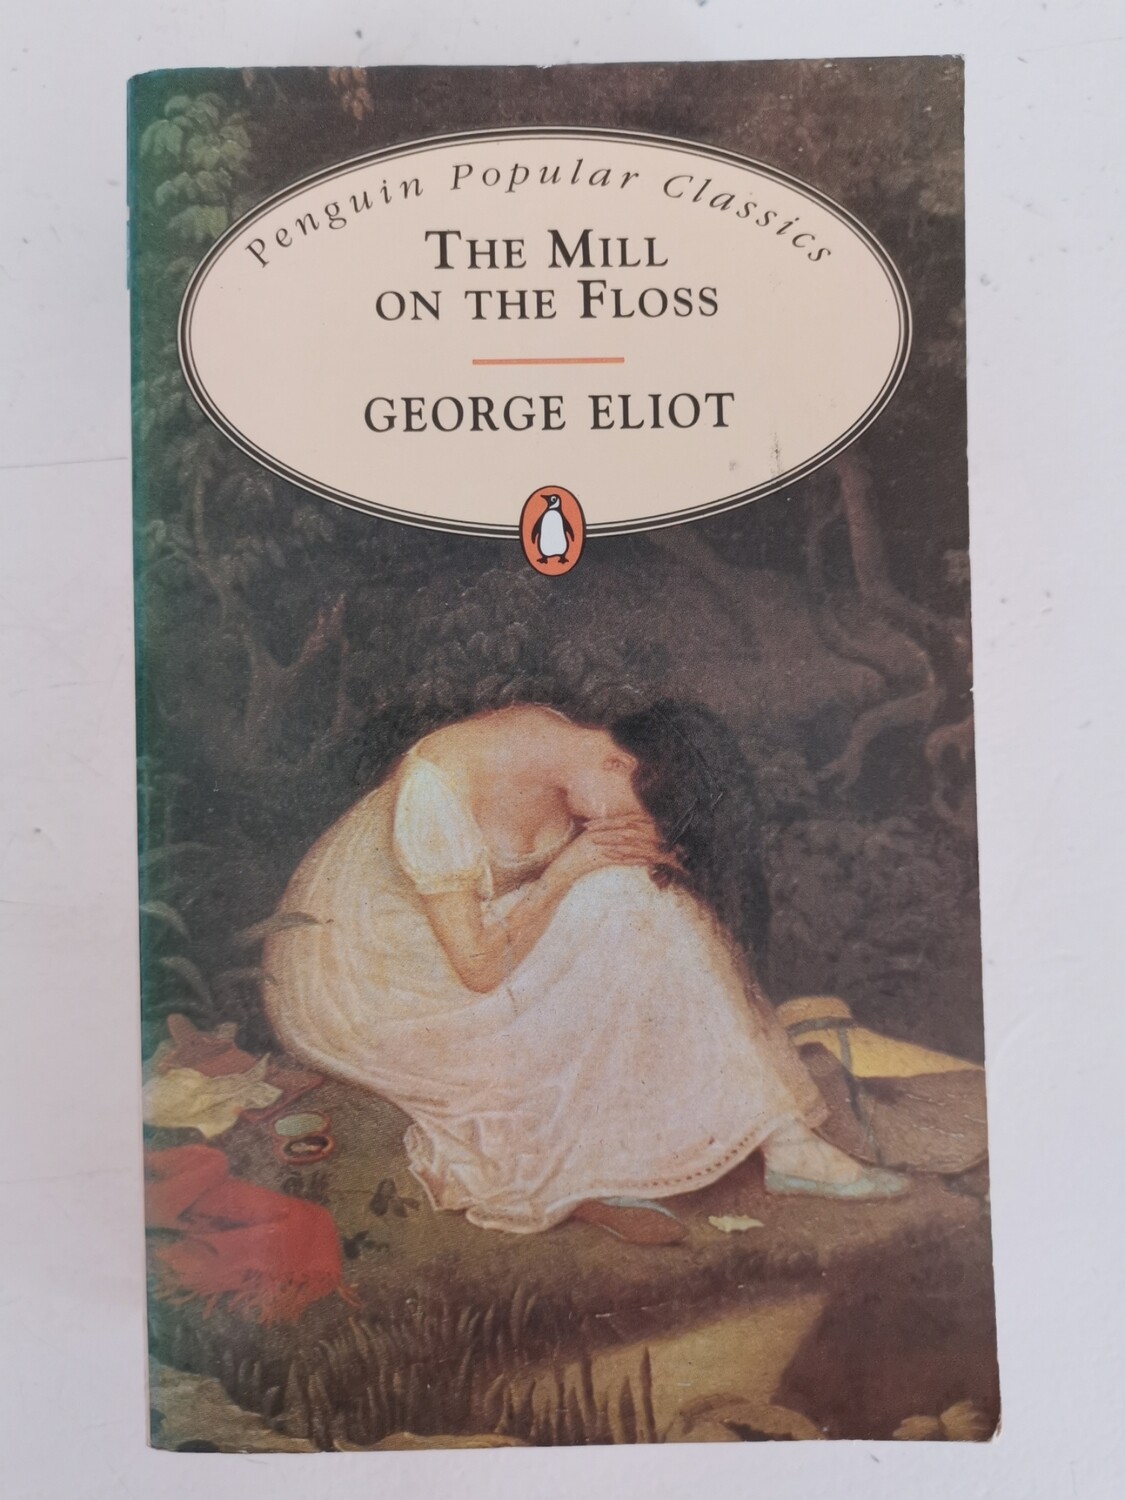 The mill on the Floss, George Elliot